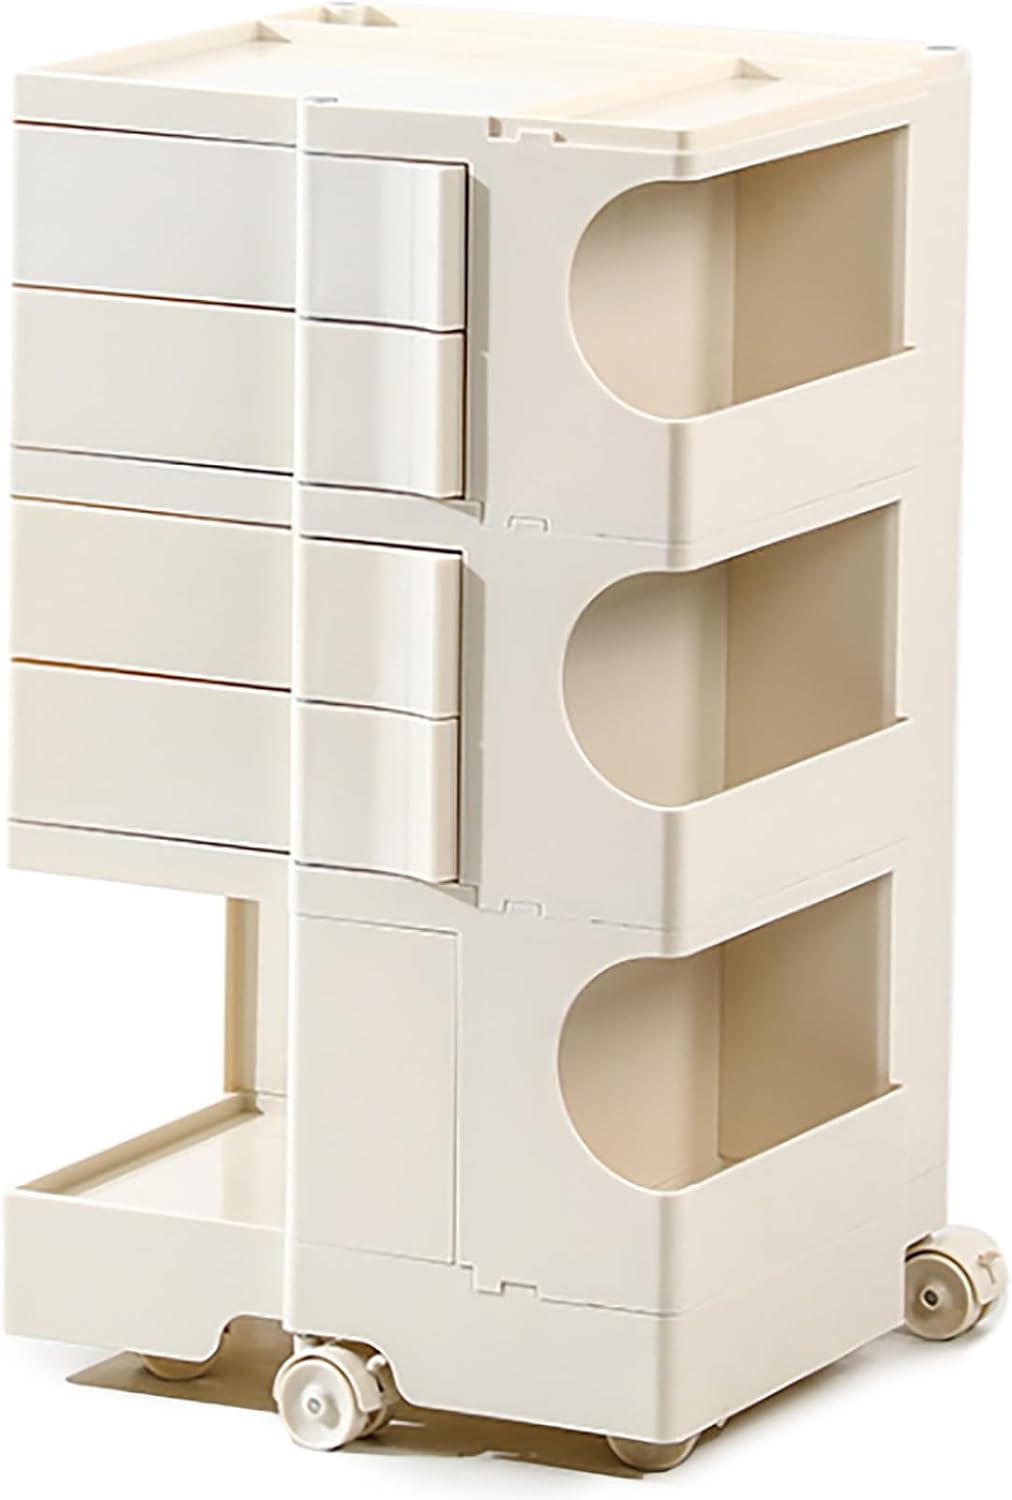 Load image into Gallery viewer, Multipurpose Utility Storage Cart - ABS Plastic Storage Caddy with Wheels and Slide Out Drawers - Kitchen Needs, Medical Tools - Cream Colour